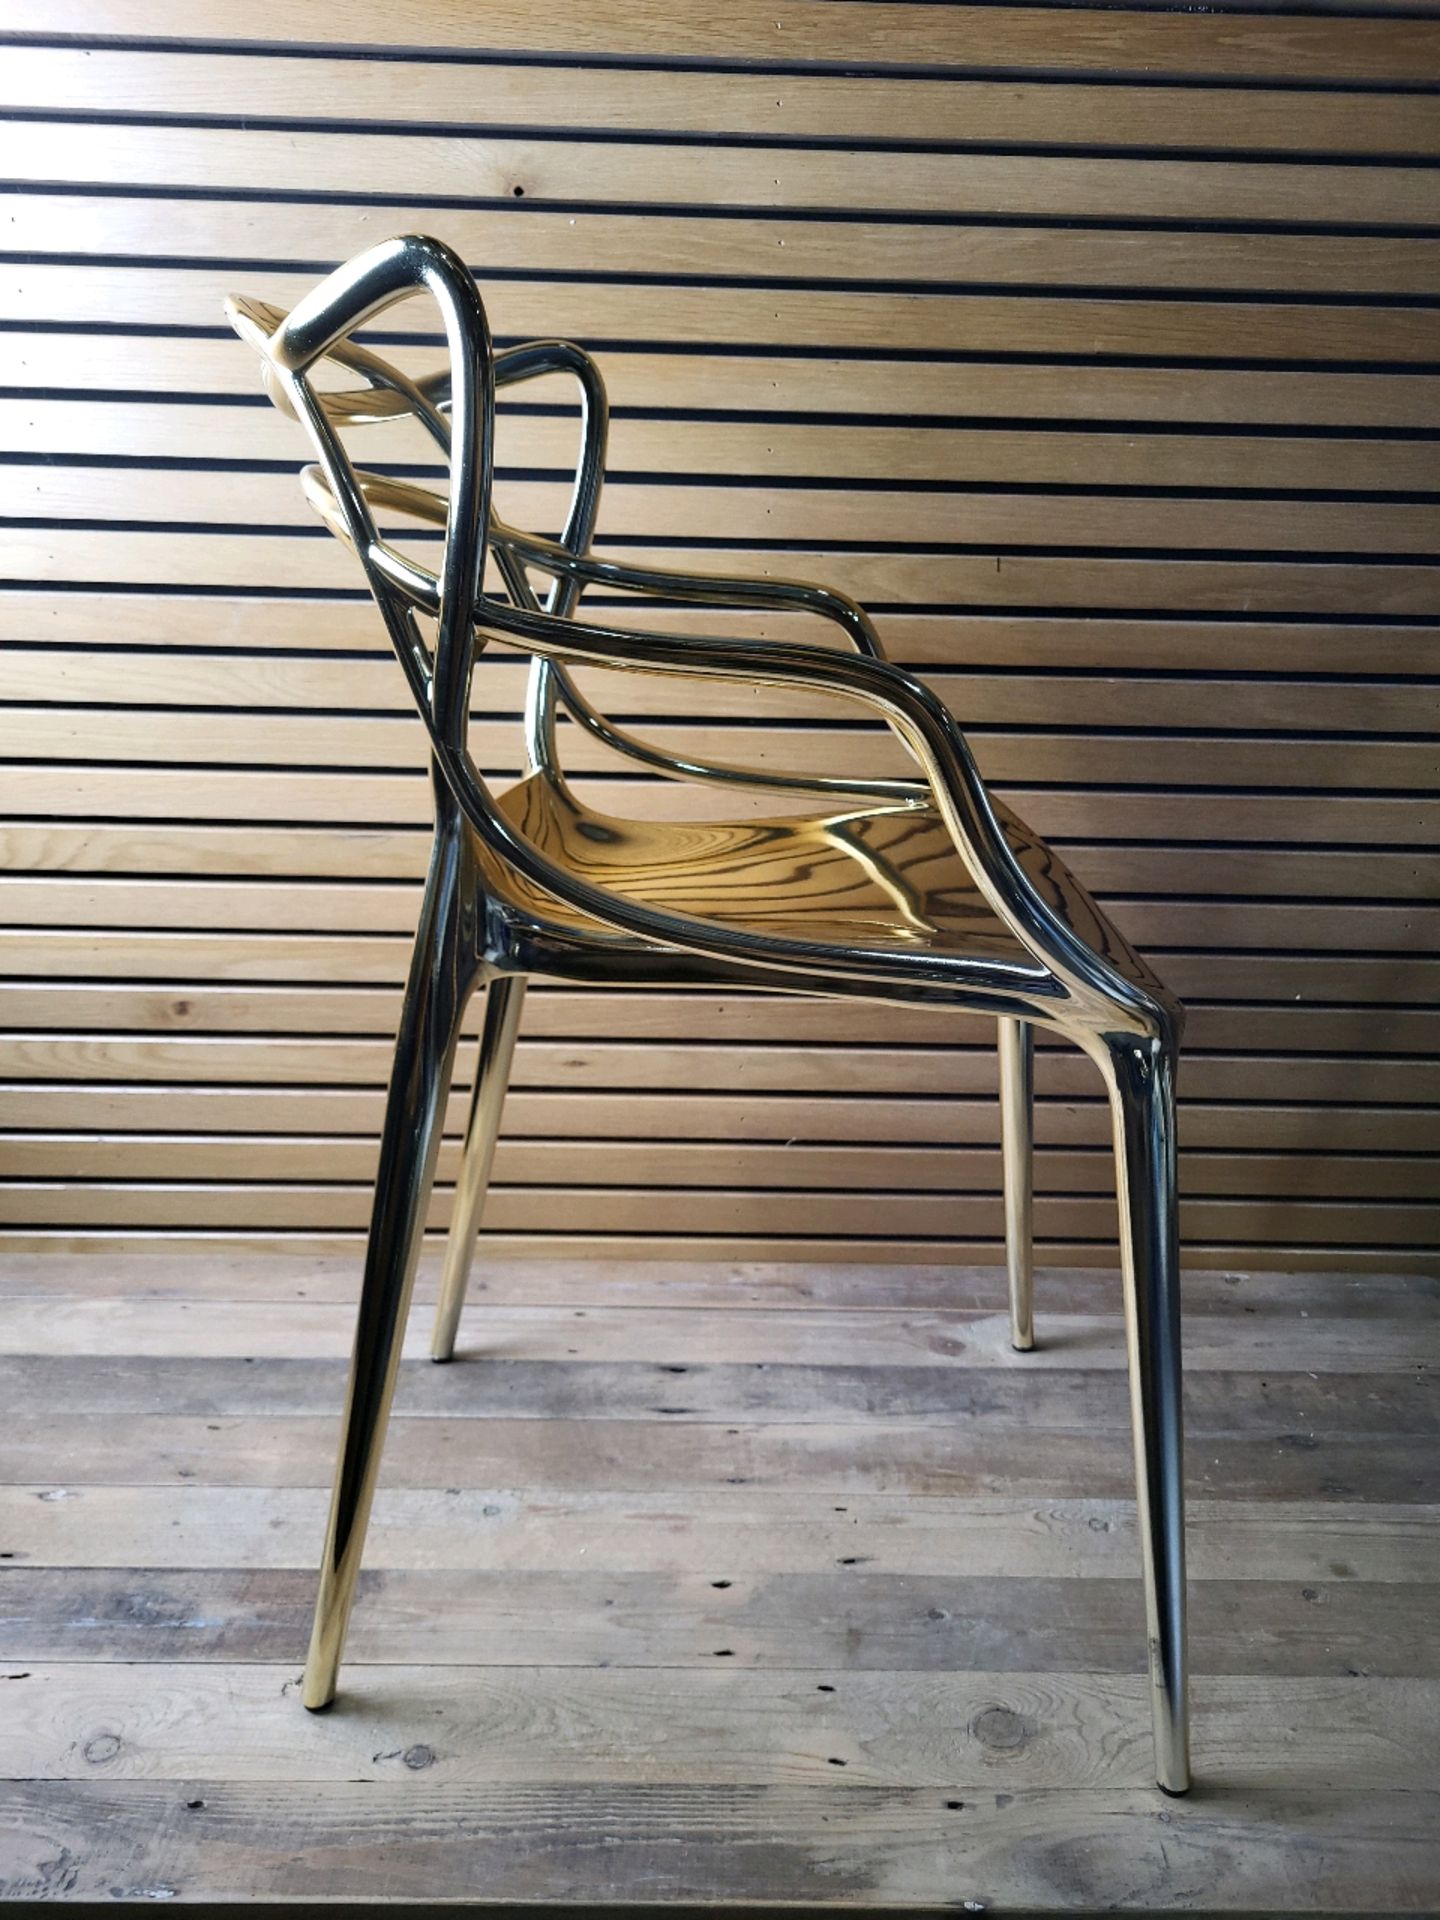 Kartell Masters Chairs - pair - in Gold designed by Philippe Starck & Eugeni Quitlett - Image 3 of 4